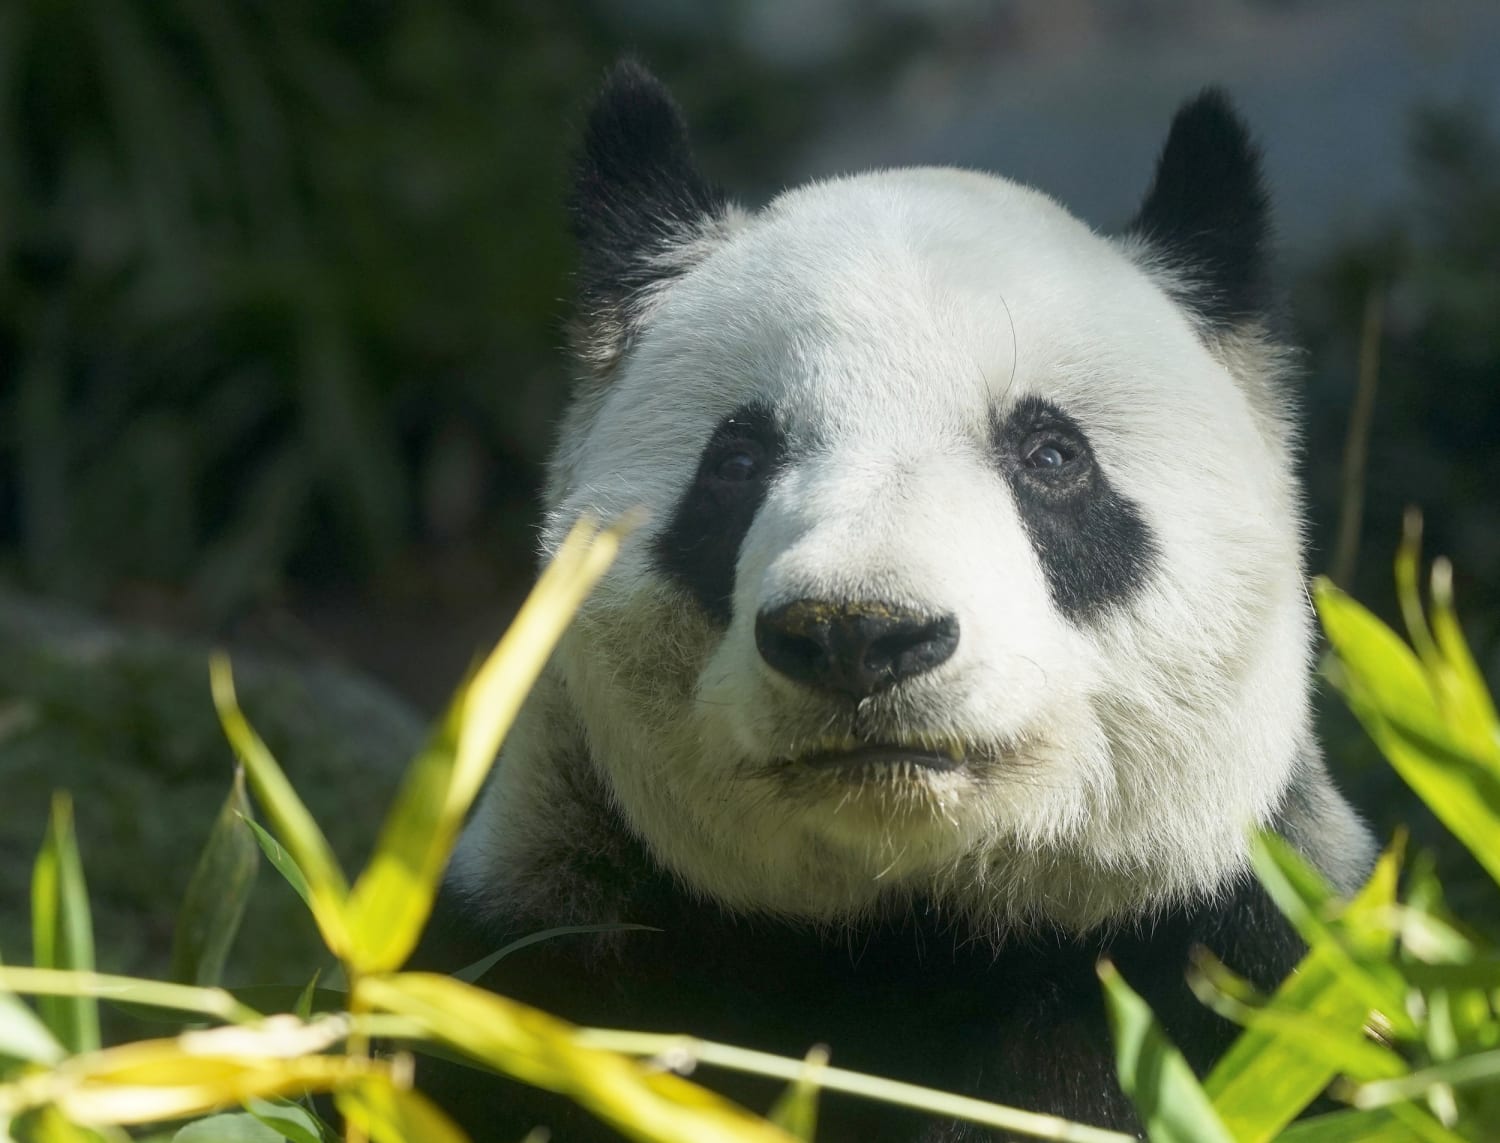 The last panda in Latin America? Mexico to decide what happens next